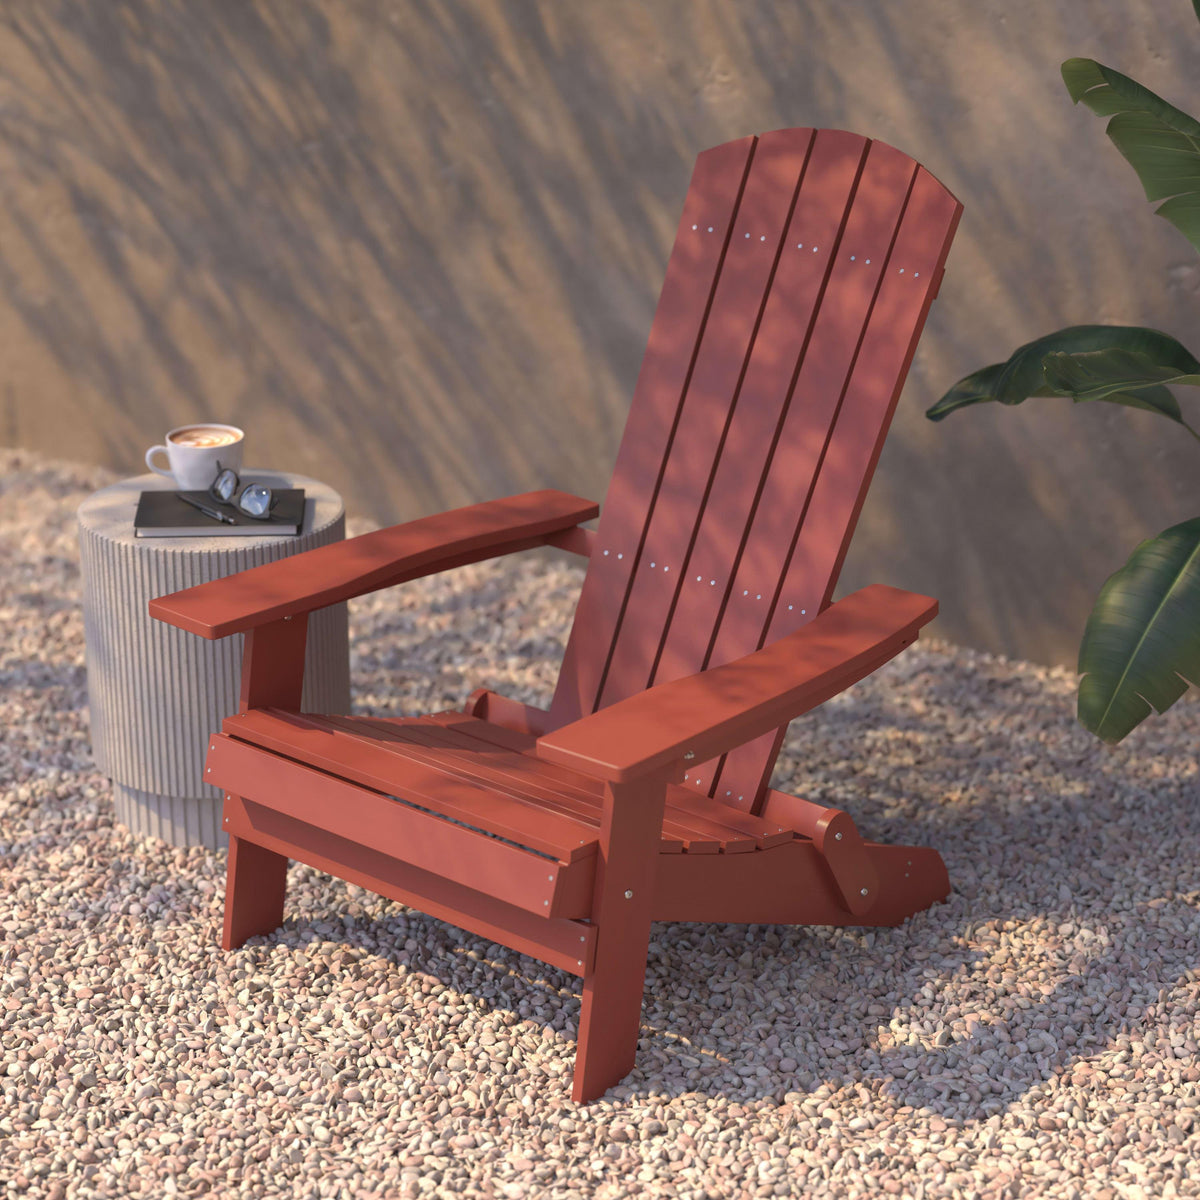 Red |#| All-Weather Poly Resin Folding Adirondack Chair in Red - Patio Chair